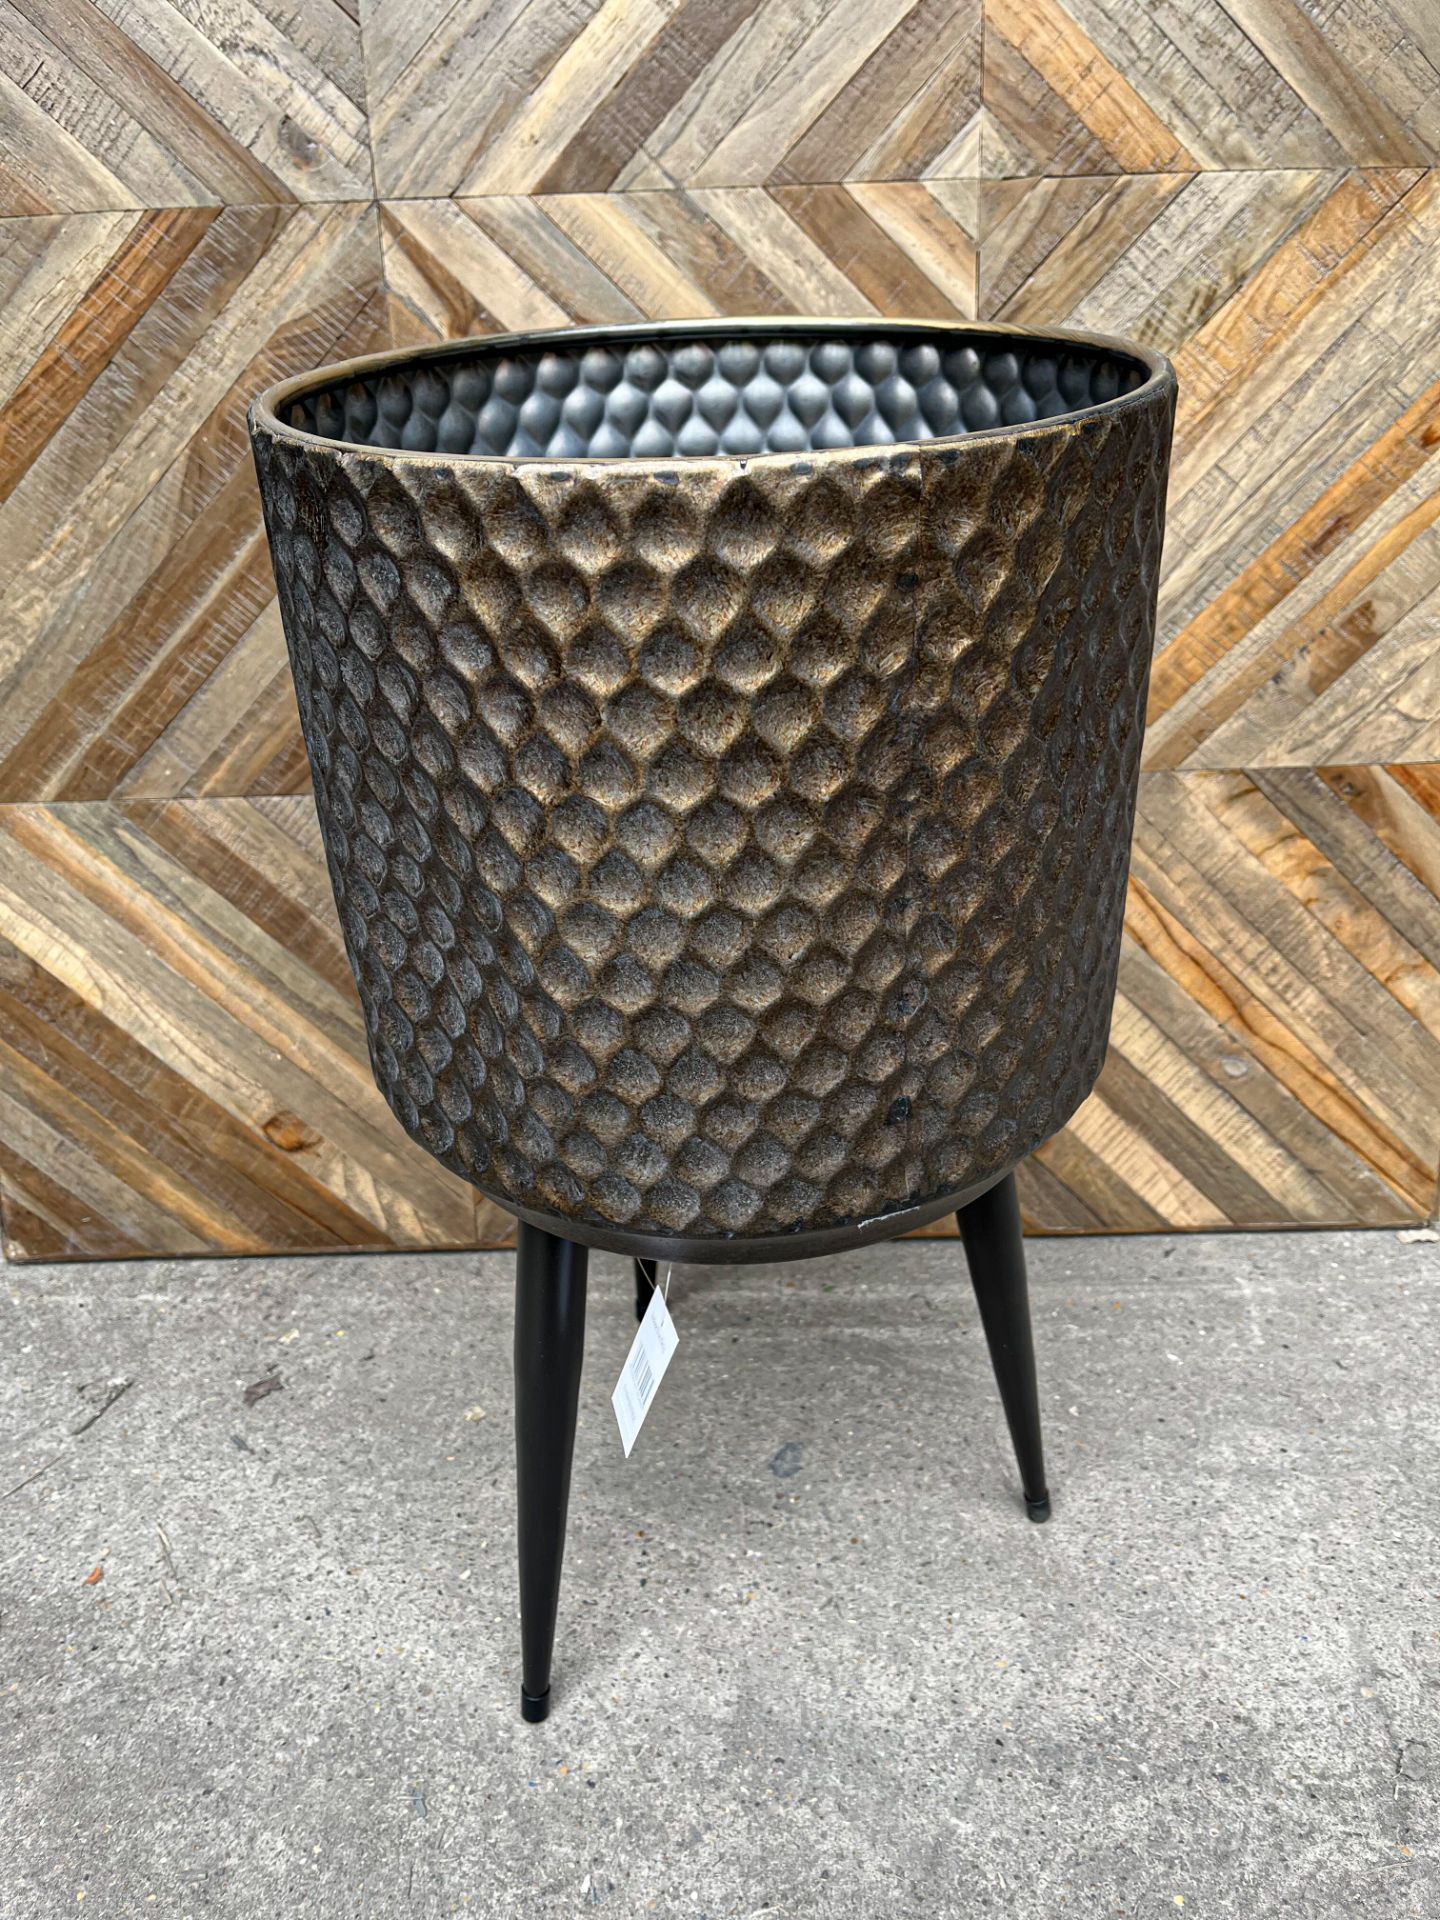 3 X BRAND NEW GISELA GRAHAM BRONZE DIMPLE METAL POT COVERS WITH LEGS LARGE 31 X 55 X 31CM RRP £69